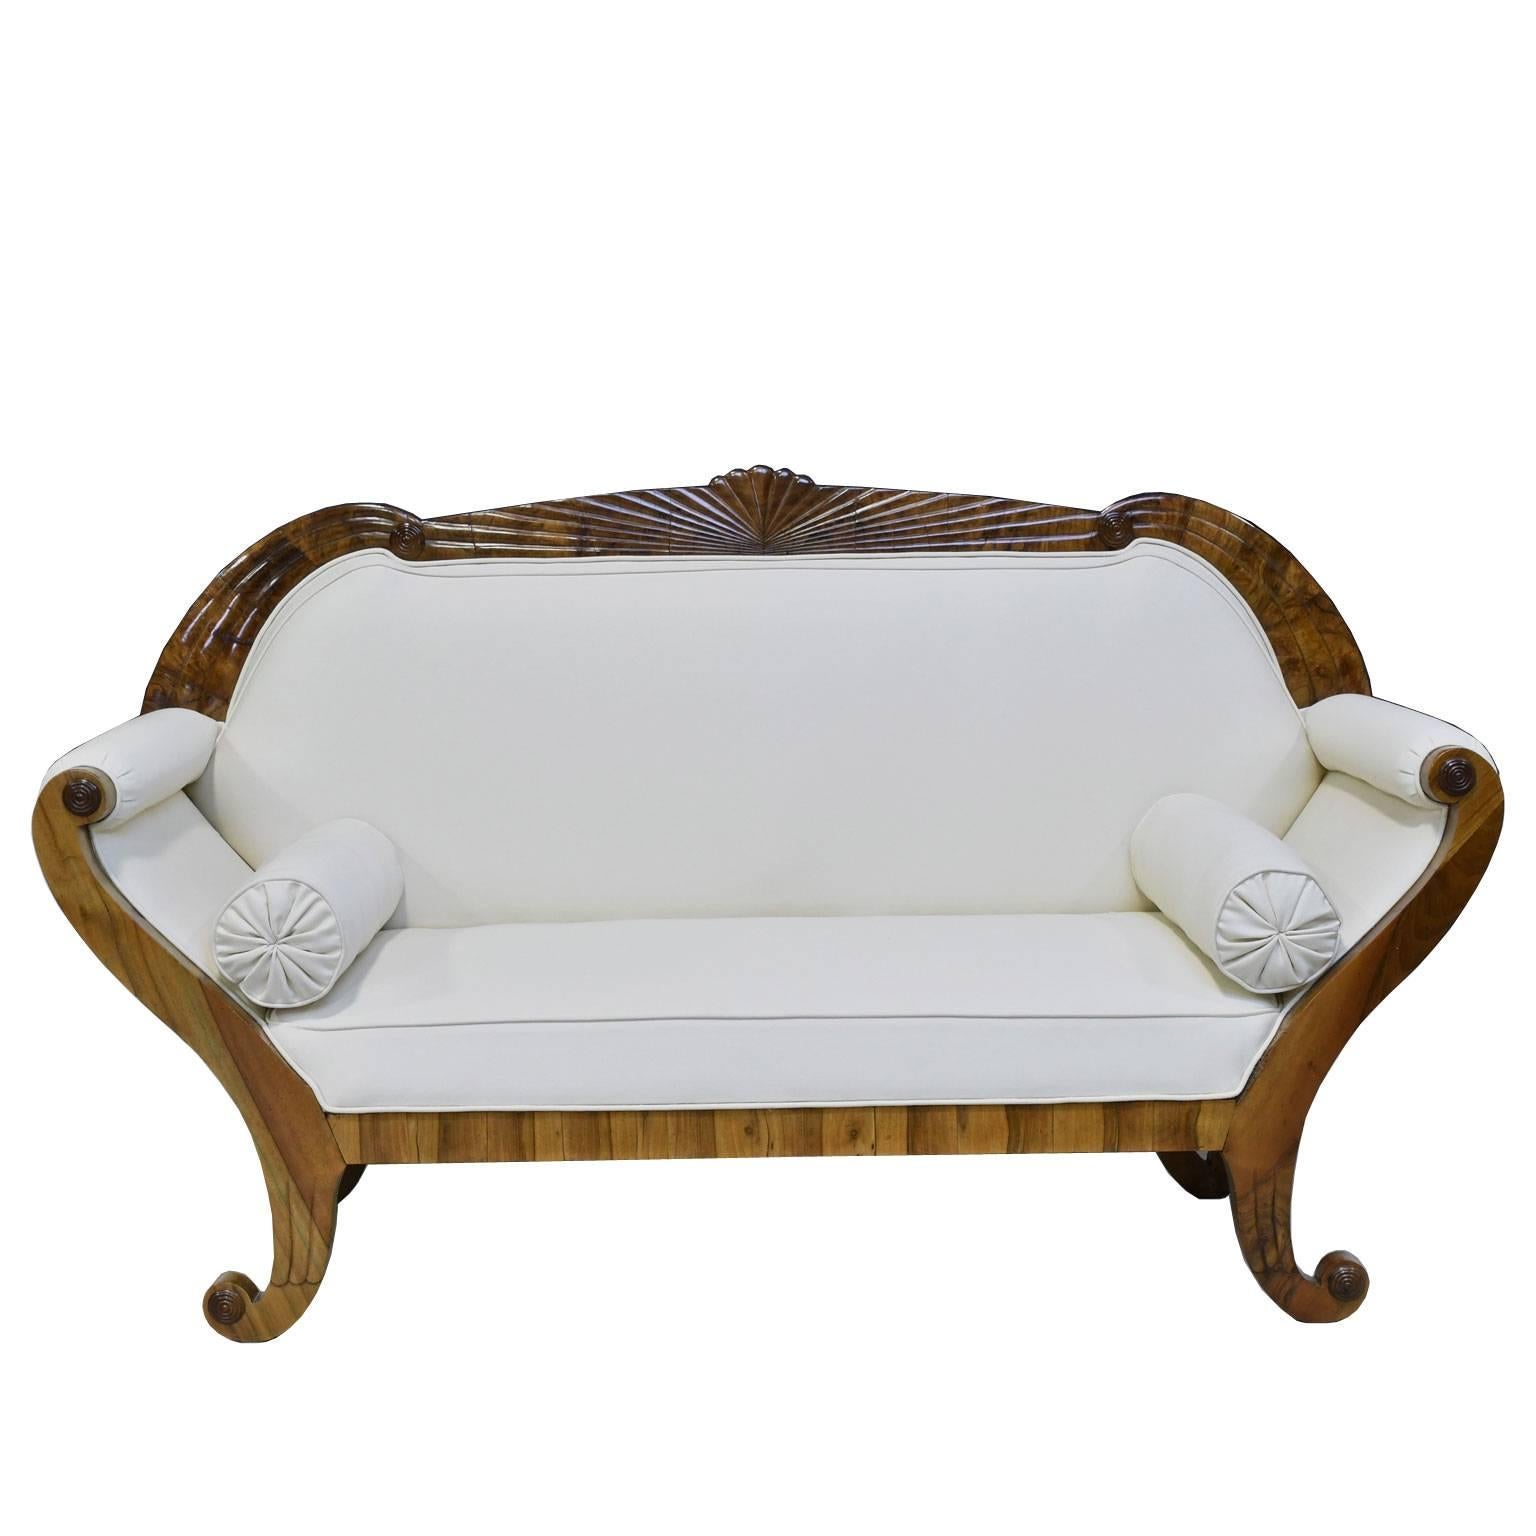 German Biedermeier Parlor Suite in Walnut with Sofa and Pair of Armchairs, circa 1830 For Sale